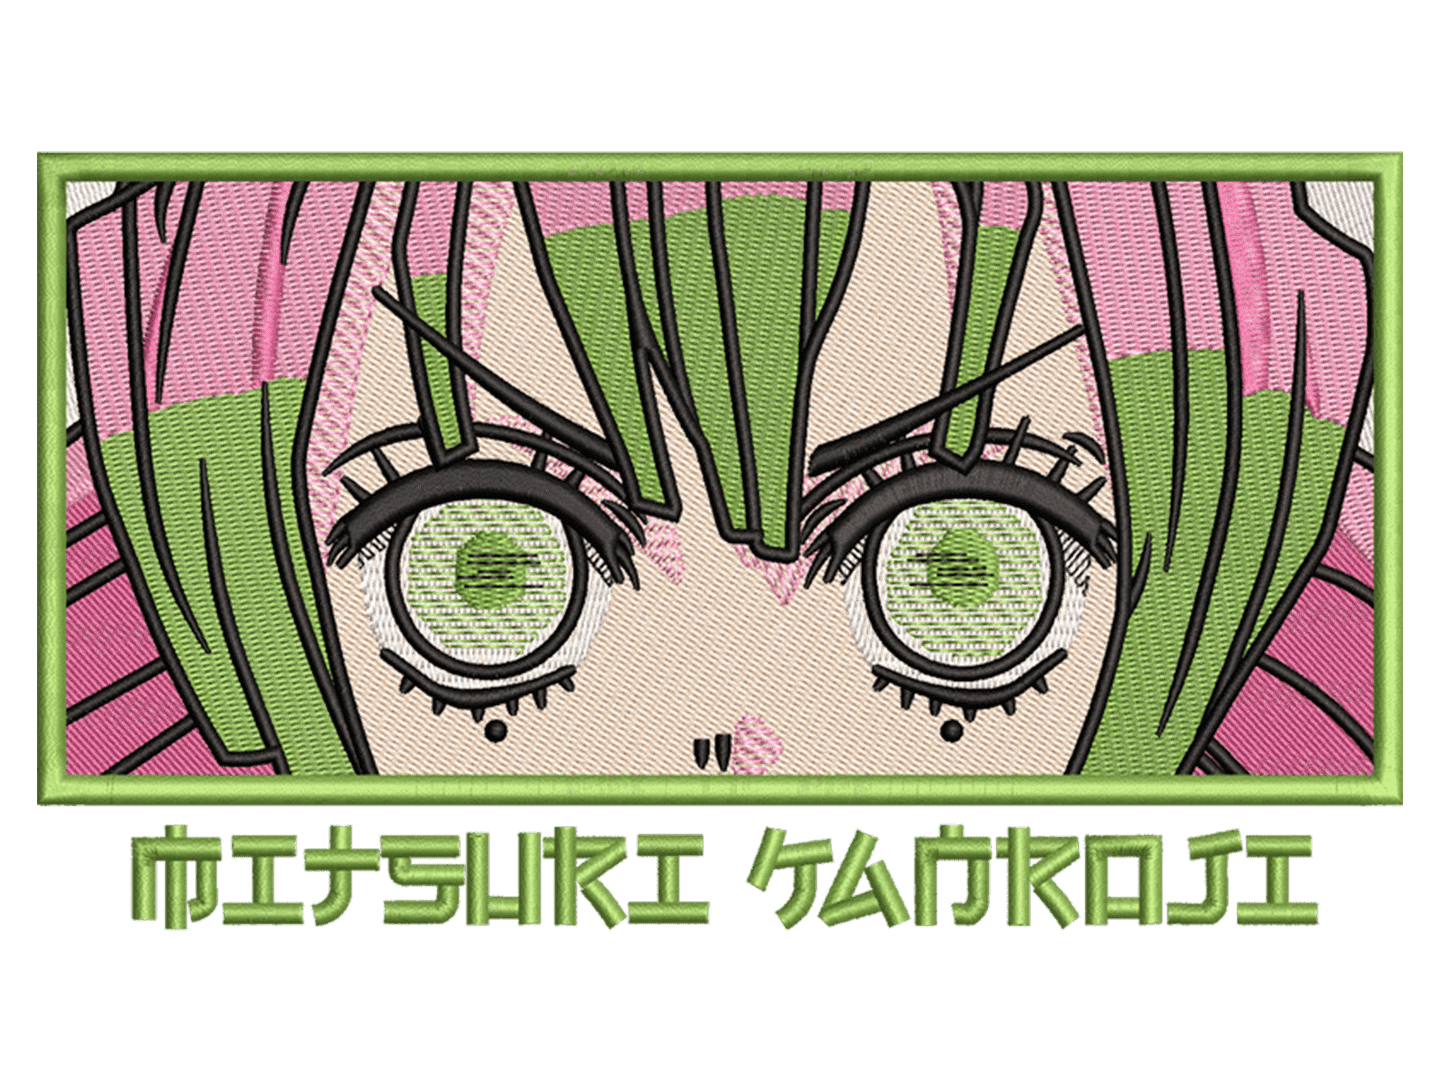 Anime-Inspired Mitsuri Kanroji Embroidery Design File main image - This anime embroidery designs files featuring Mitsuri Kanroji from Demon Slayer. Digital download in DST & PES formats. High-quality machine embroidery patterns by EmbroPlex.